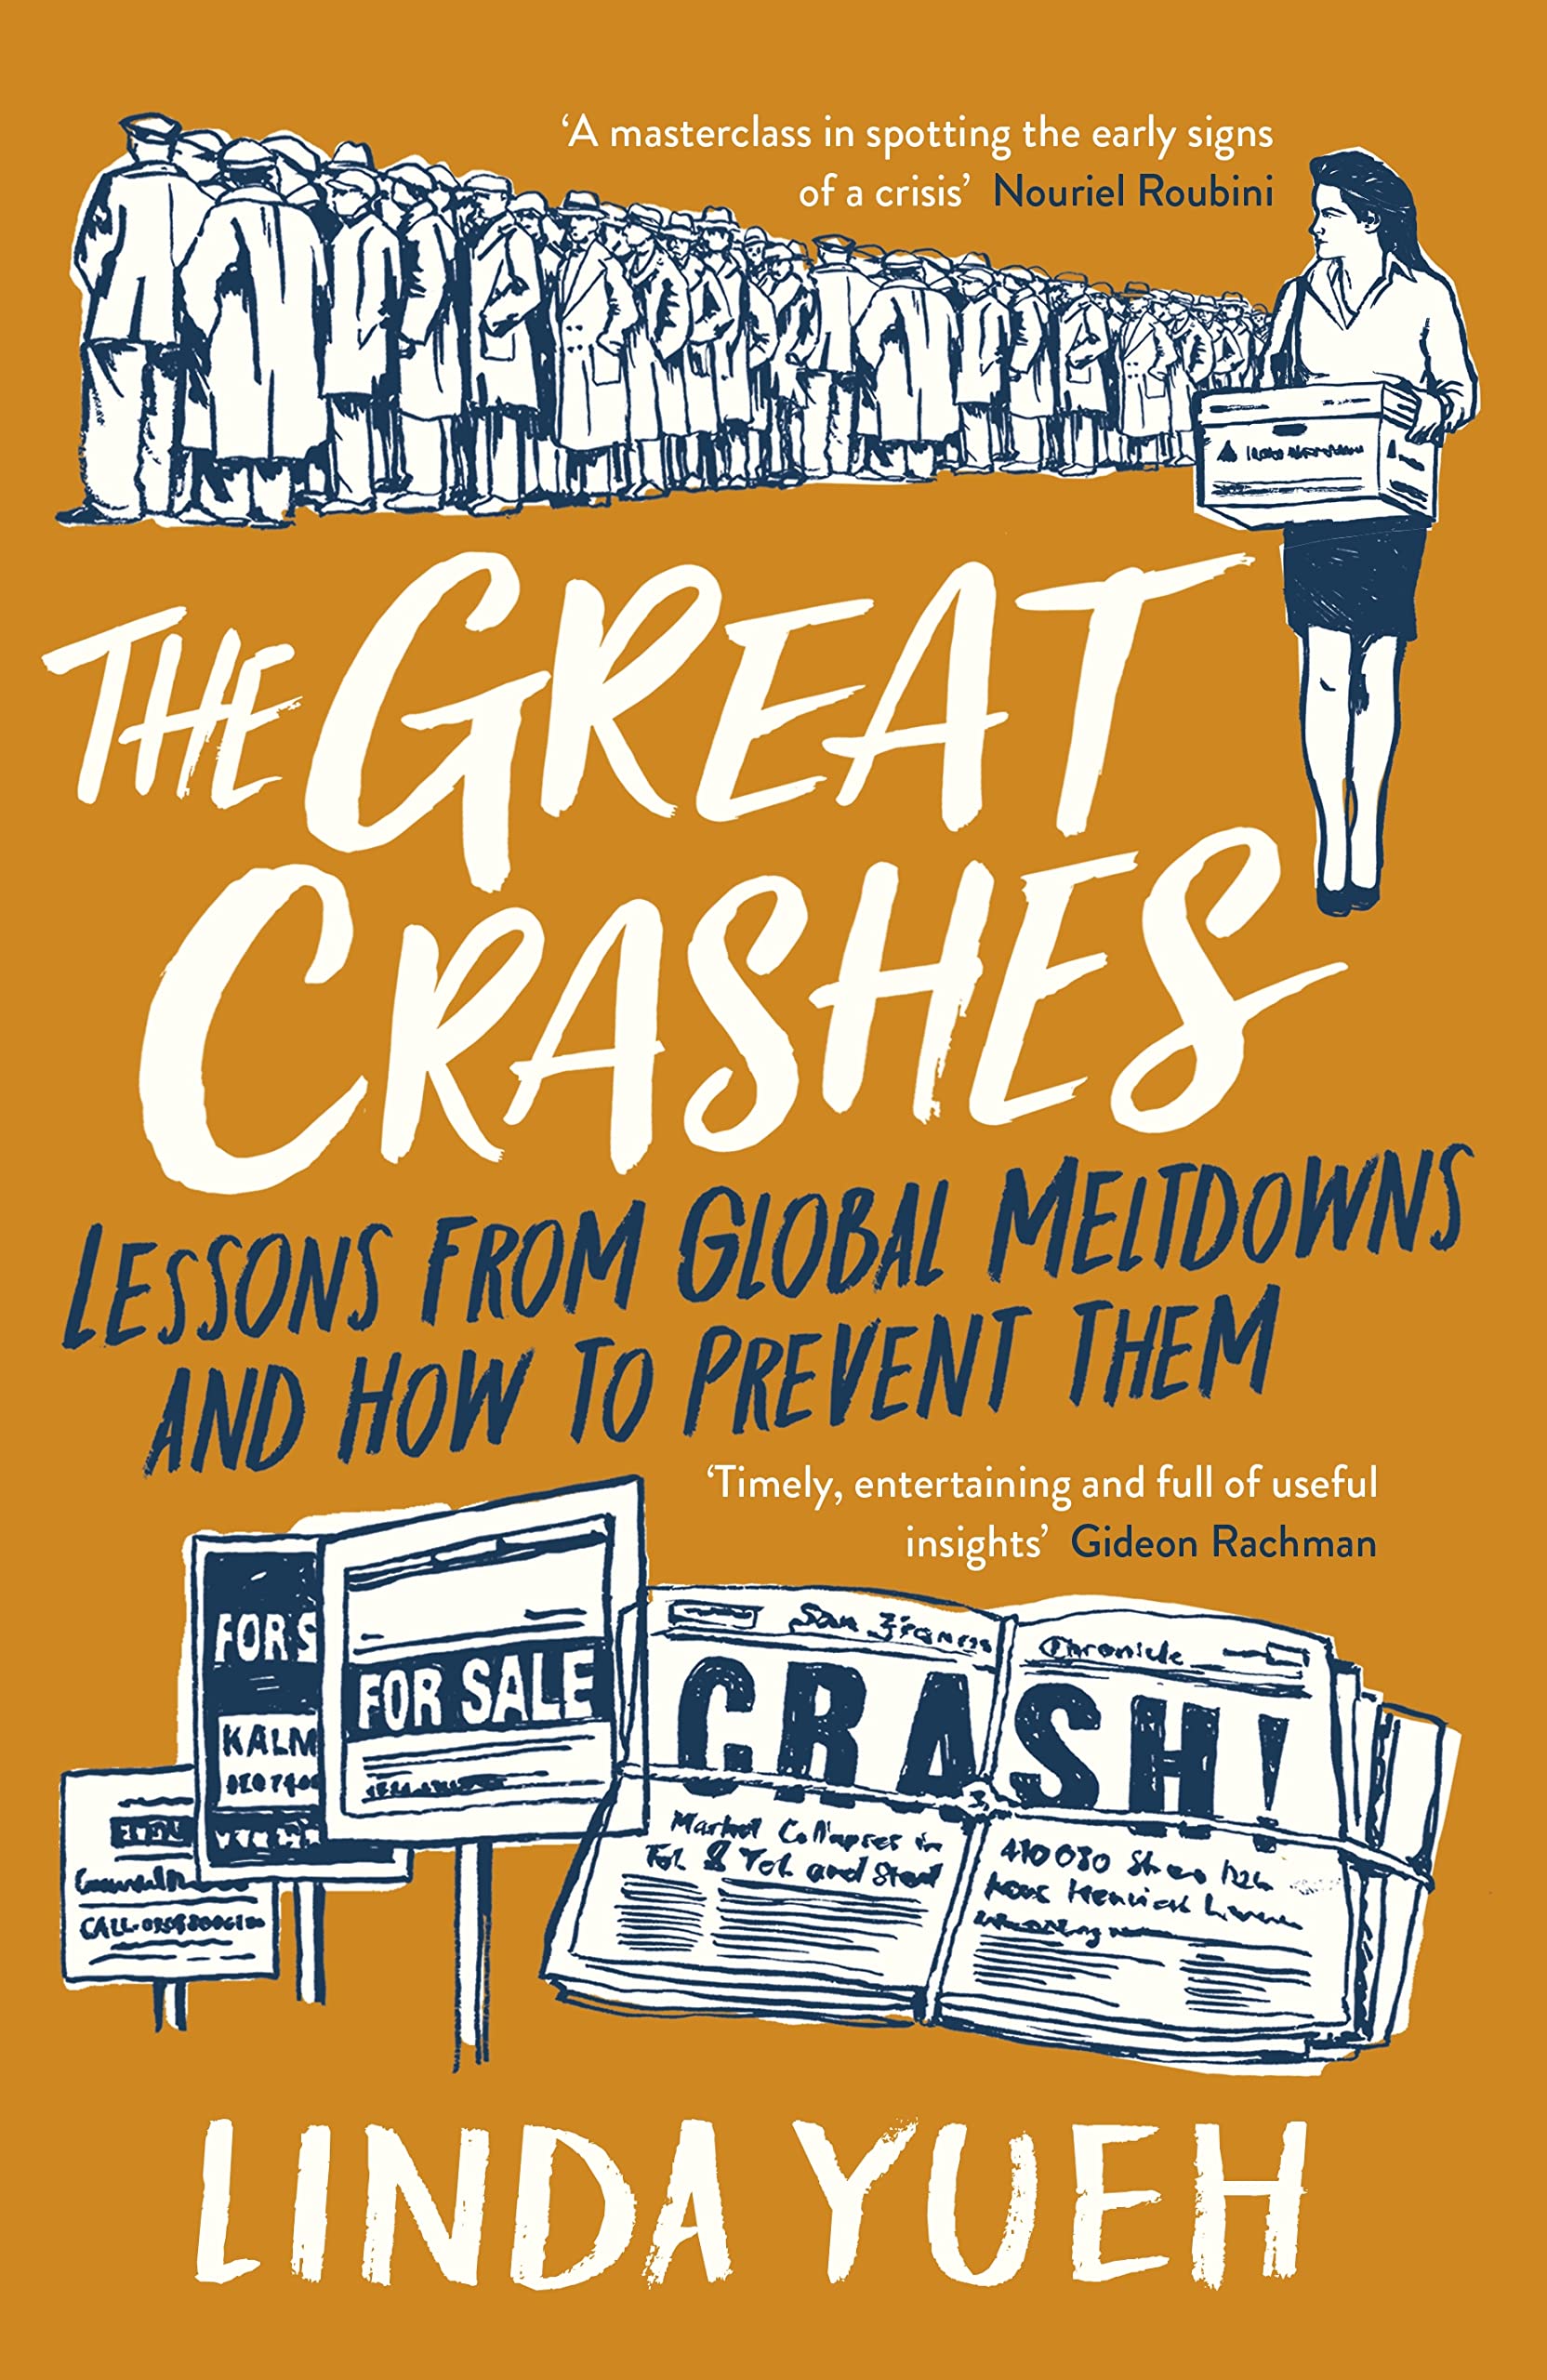 The Great Crashes: Lessons from Global Meltdowns and How to Prevent Them Cover